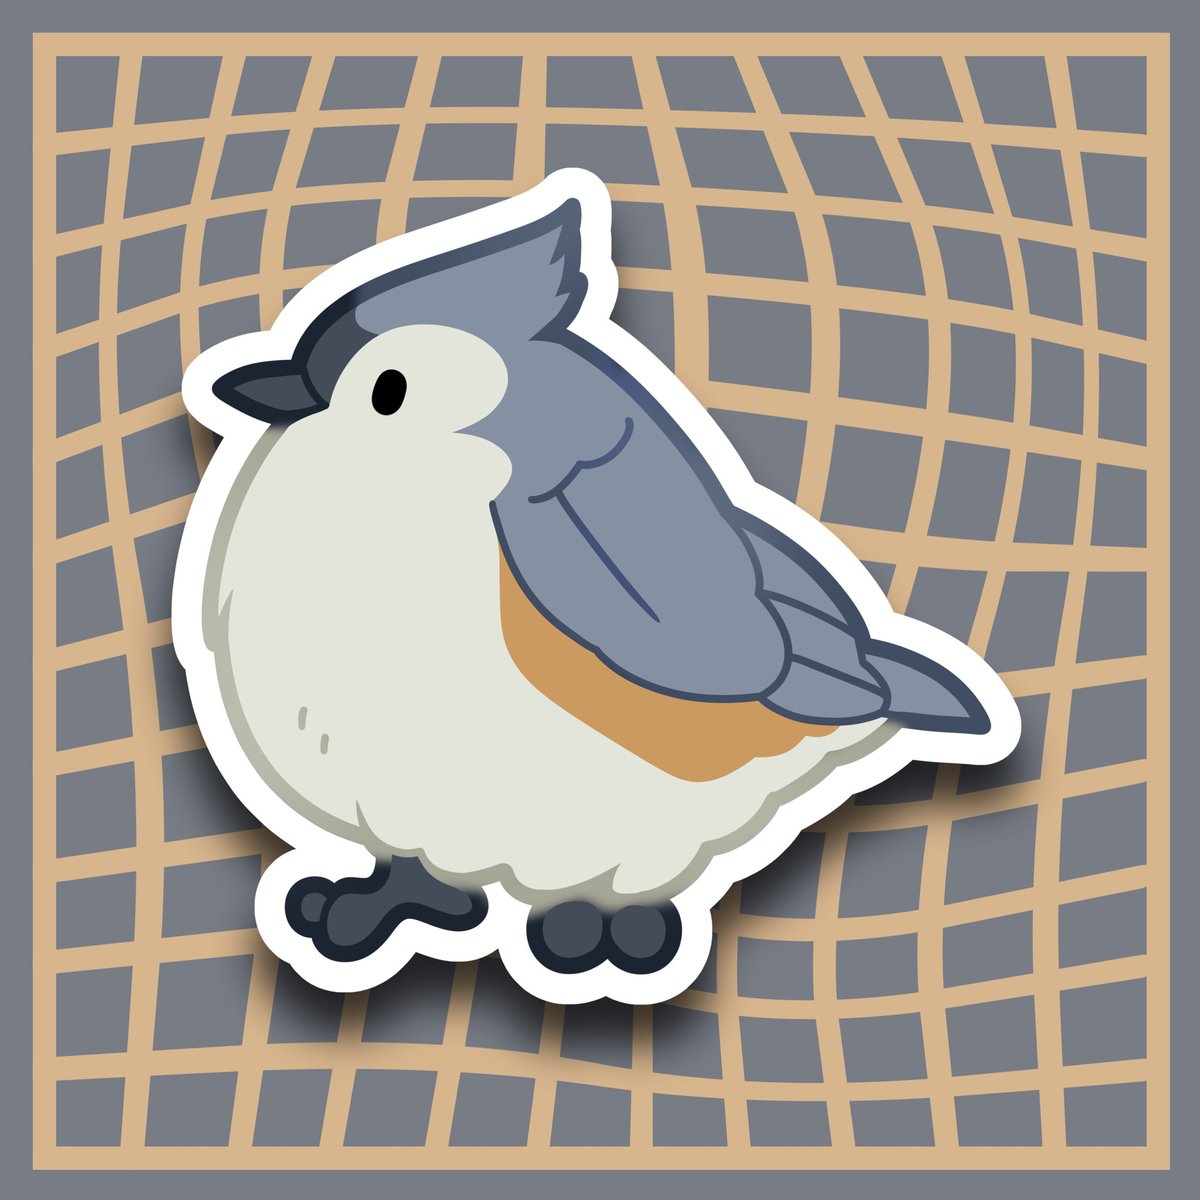 Day 60 of Bird-A-Day!

The Tufted Titmouse!